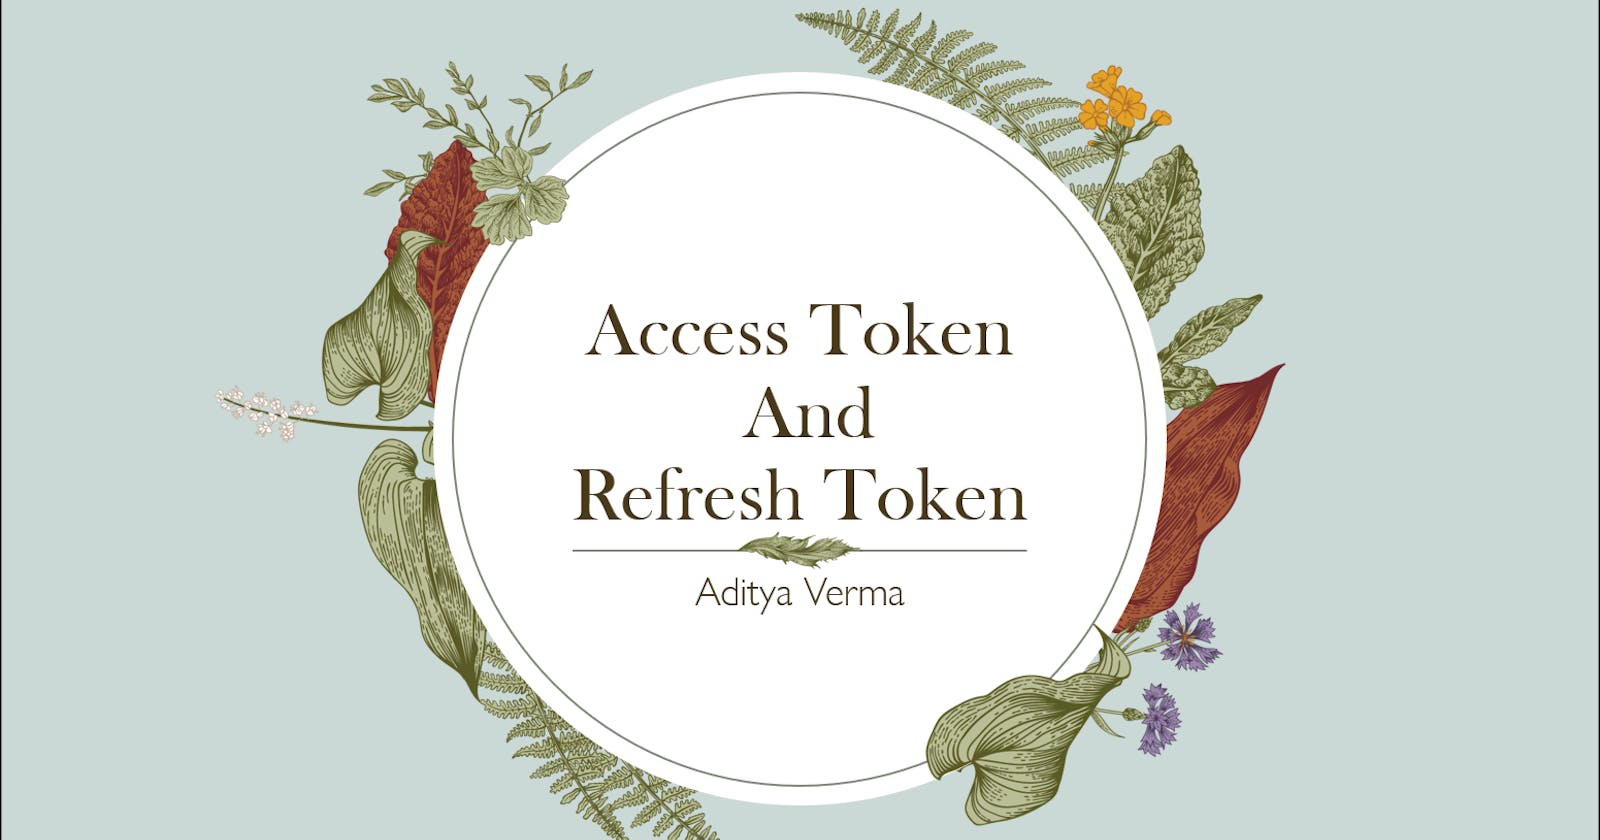 Access Tokens and Refresh Tokens